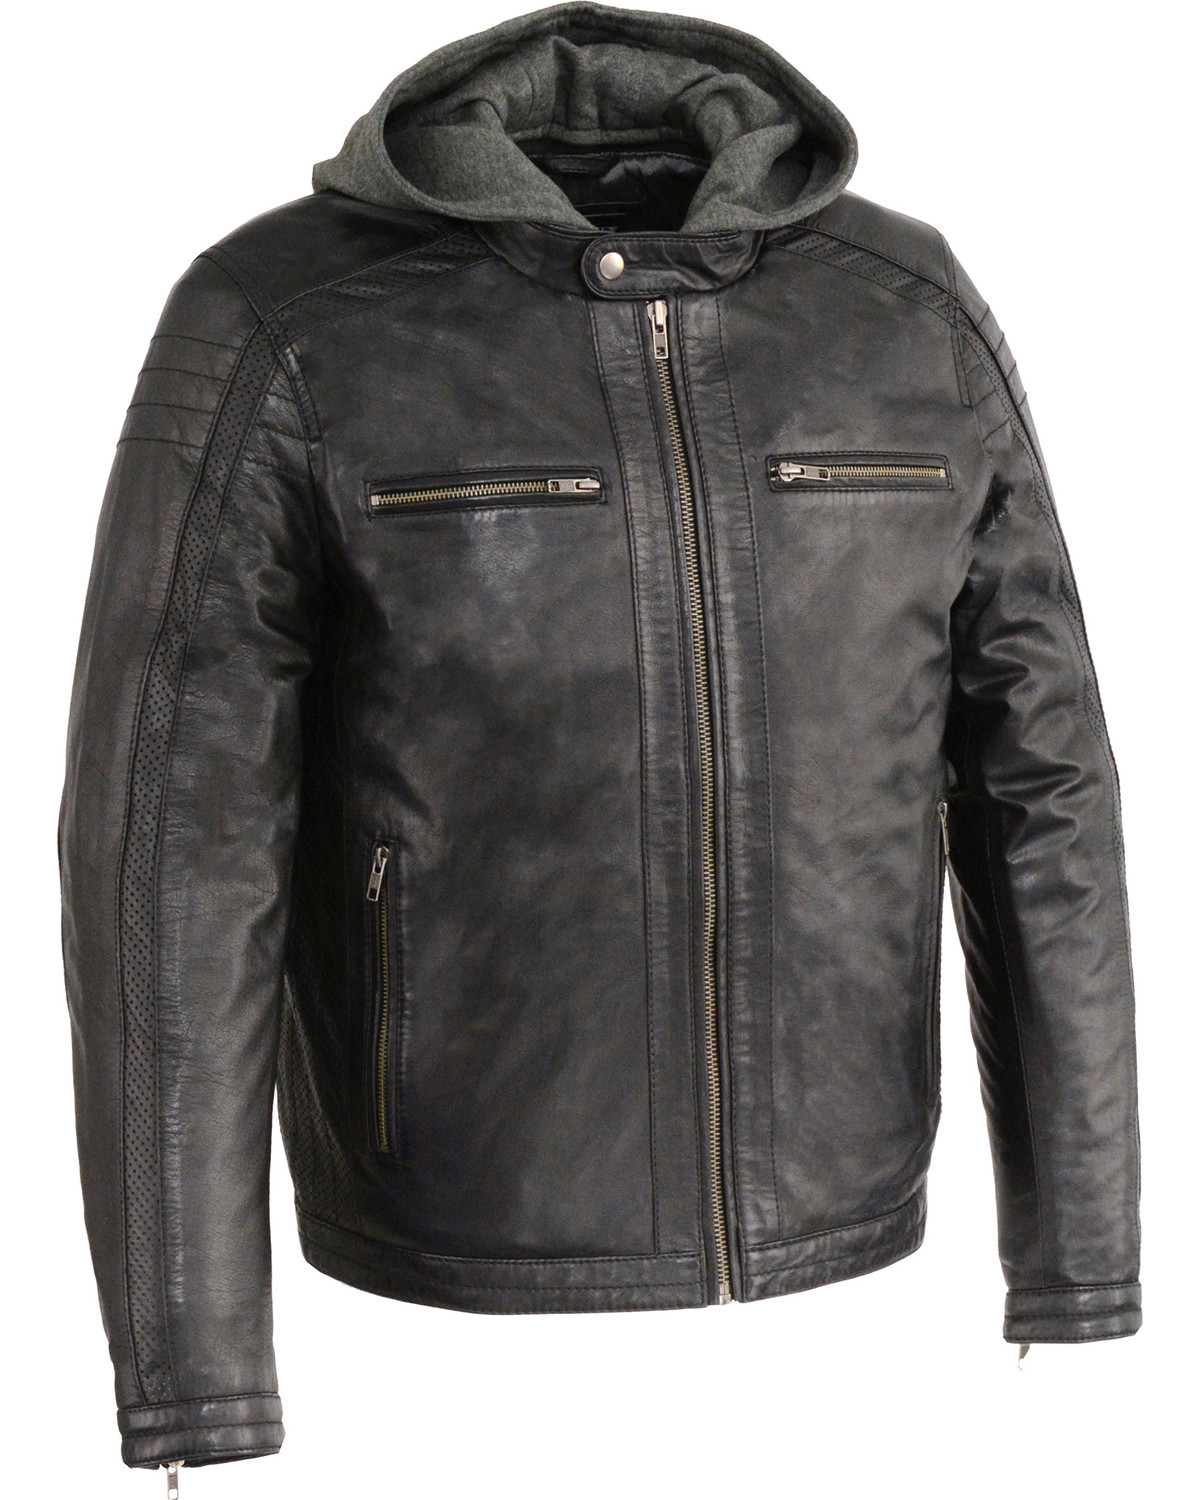 Milwaukee Leather Men's Zipper Front Jacket w/ Removable Hood